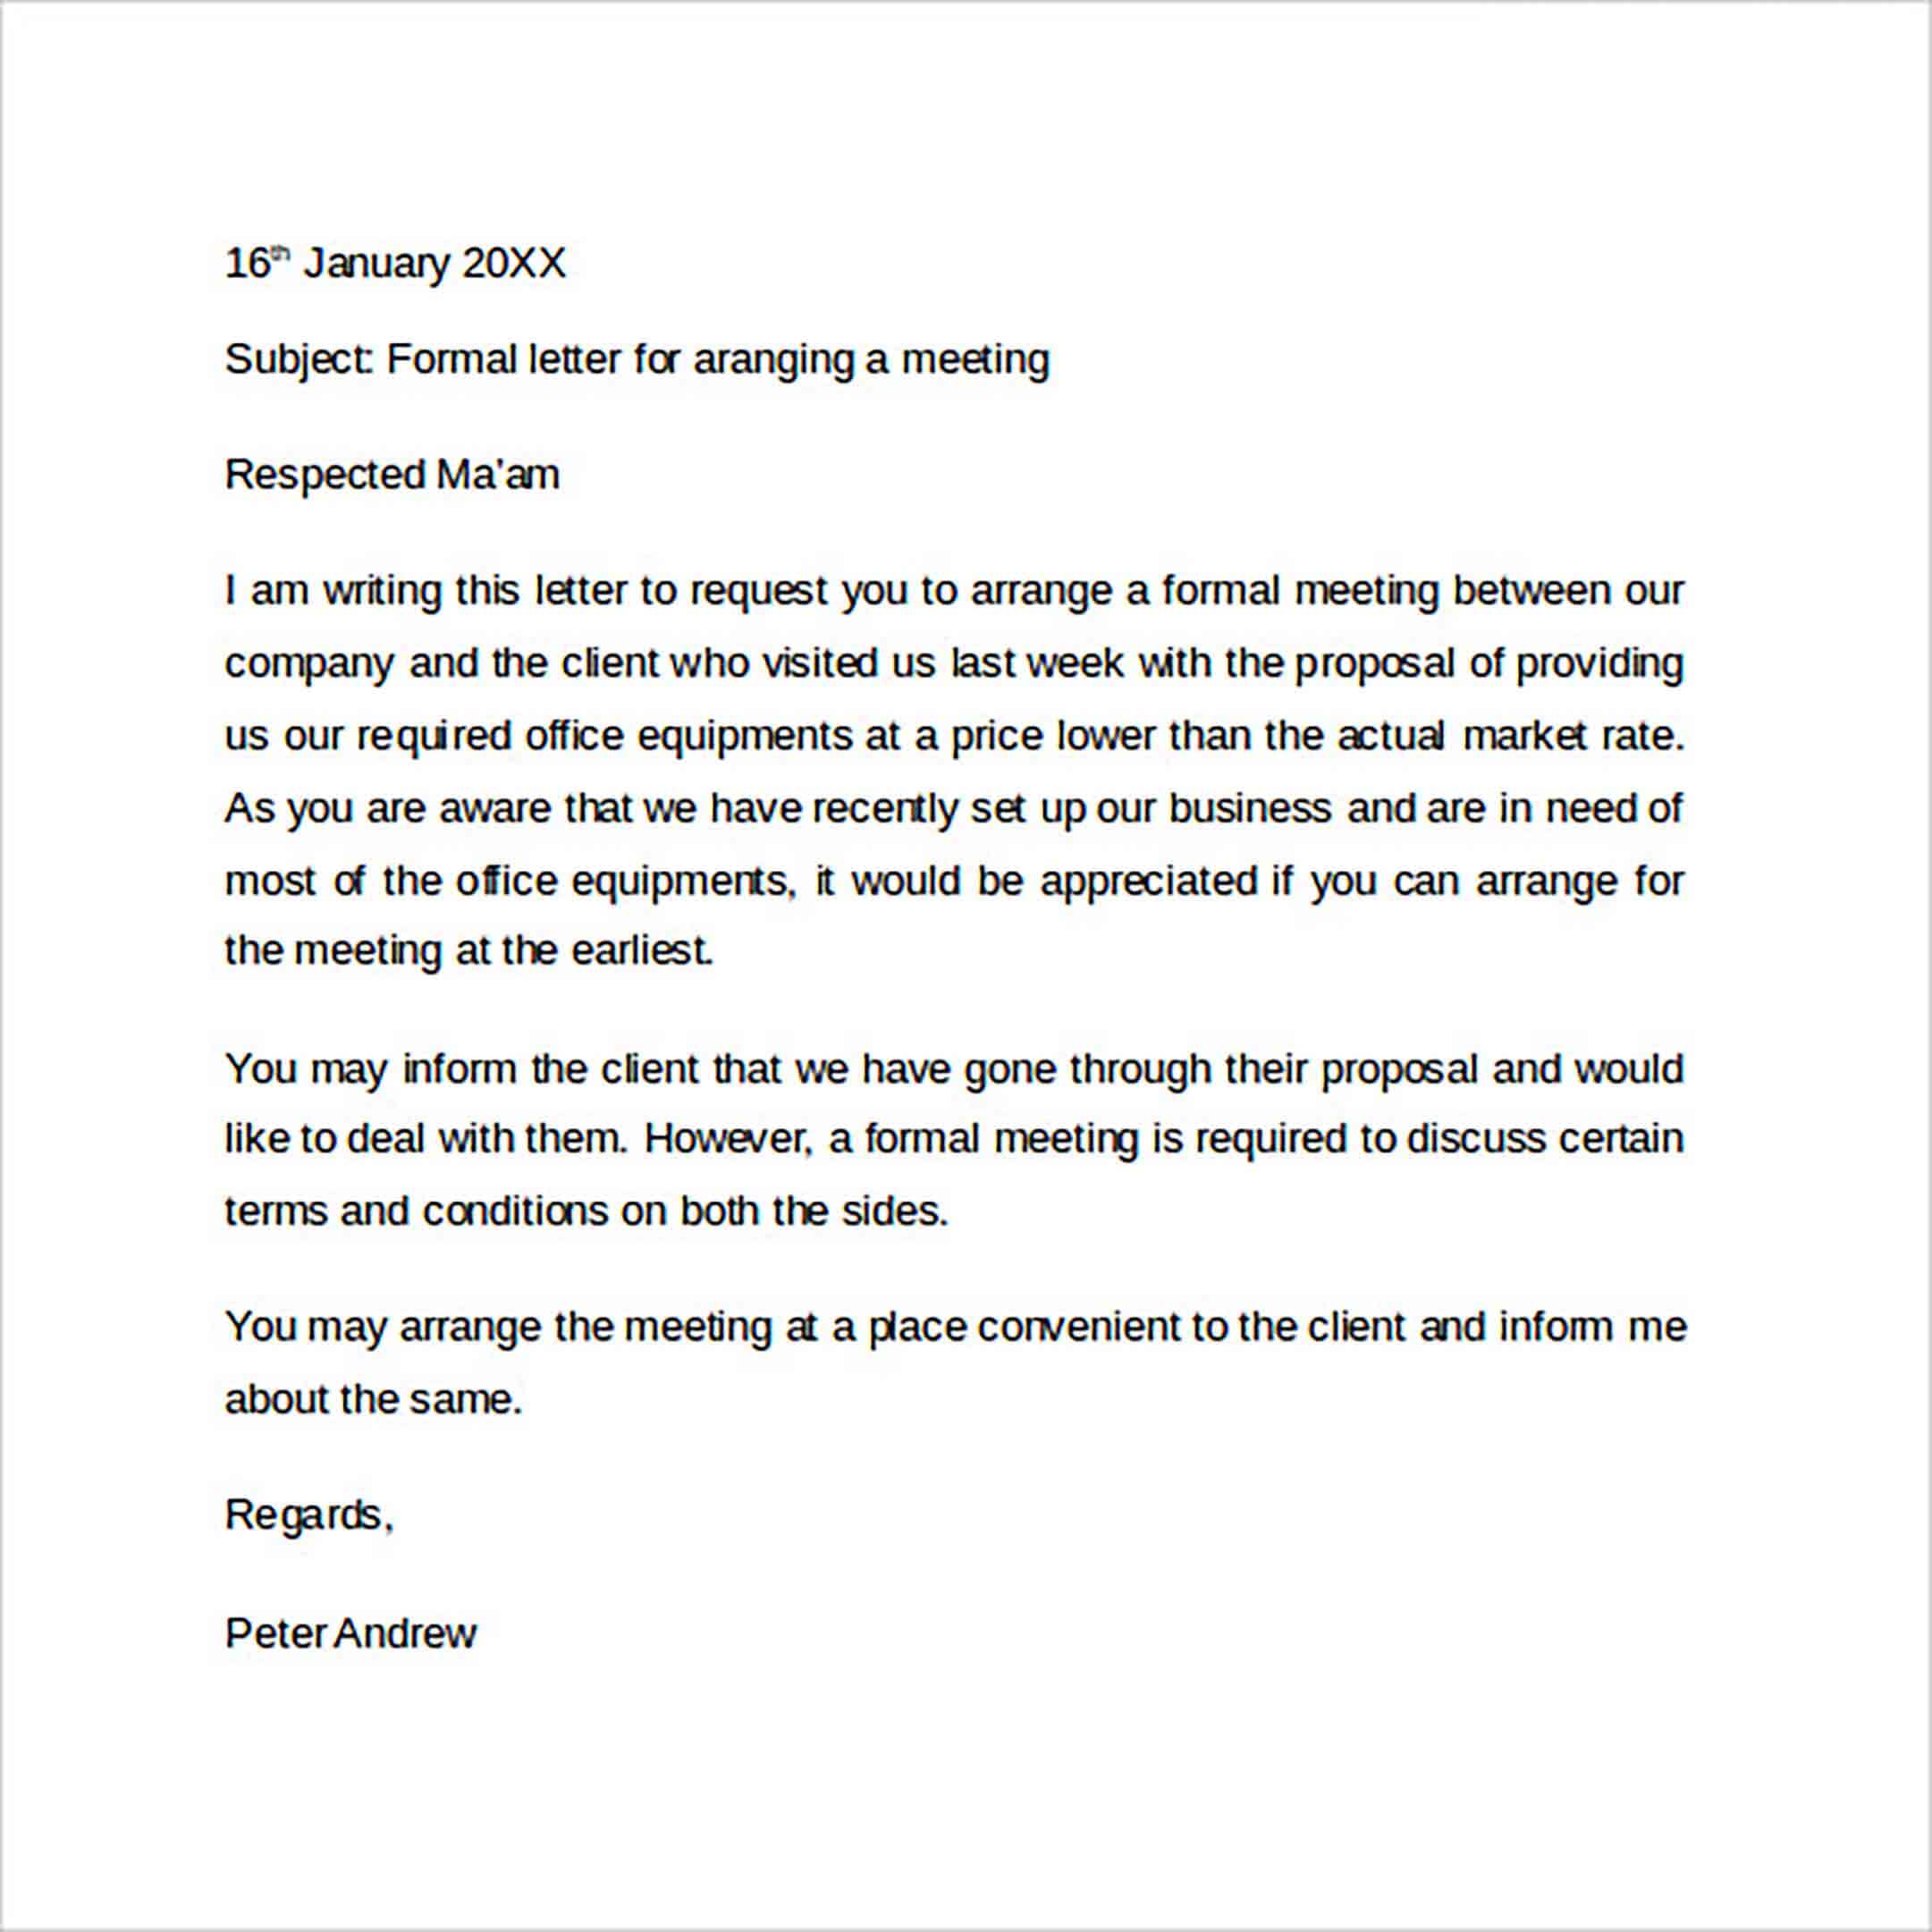 Format A Formal Letter from moussyusa.com